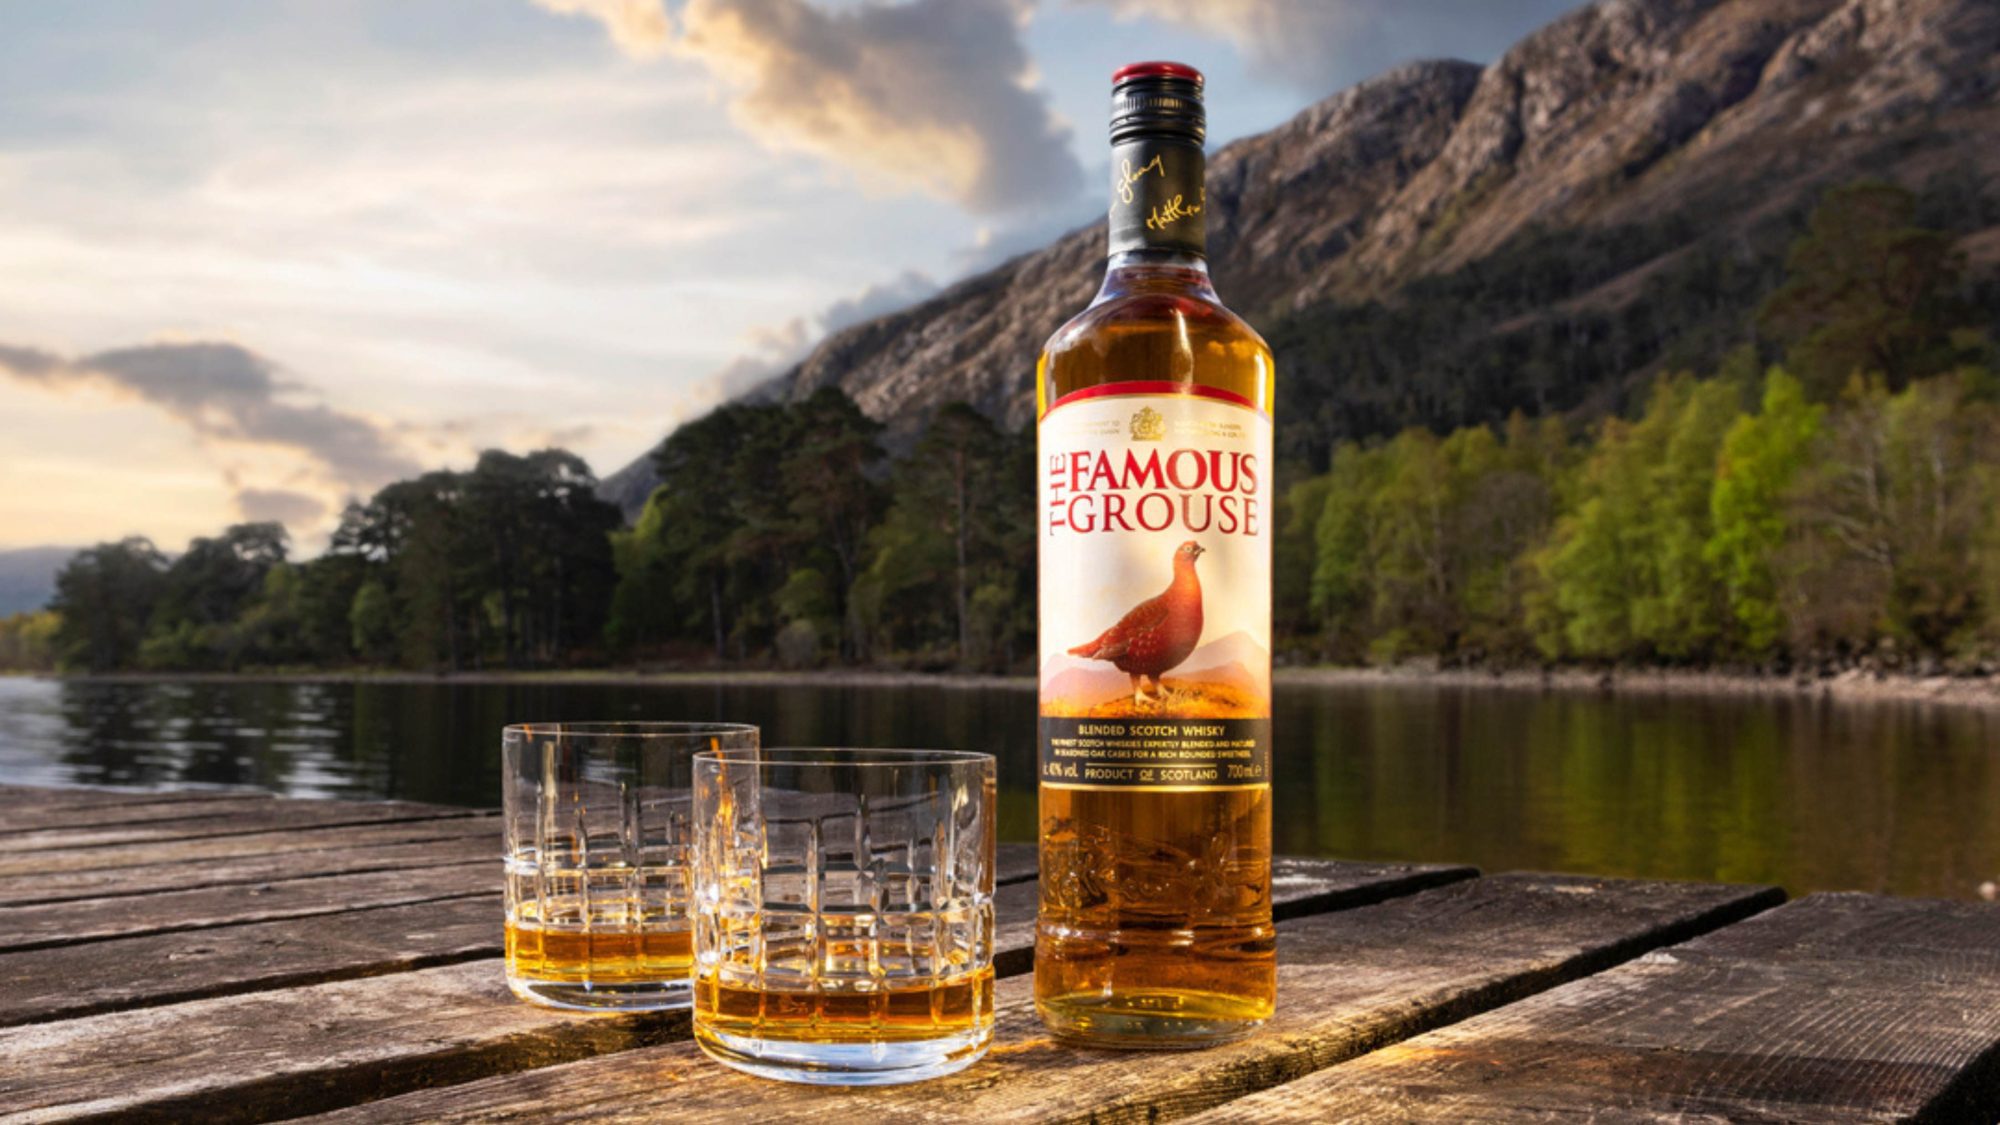 The Famous Grouse: An Elevation of Everyday Moments